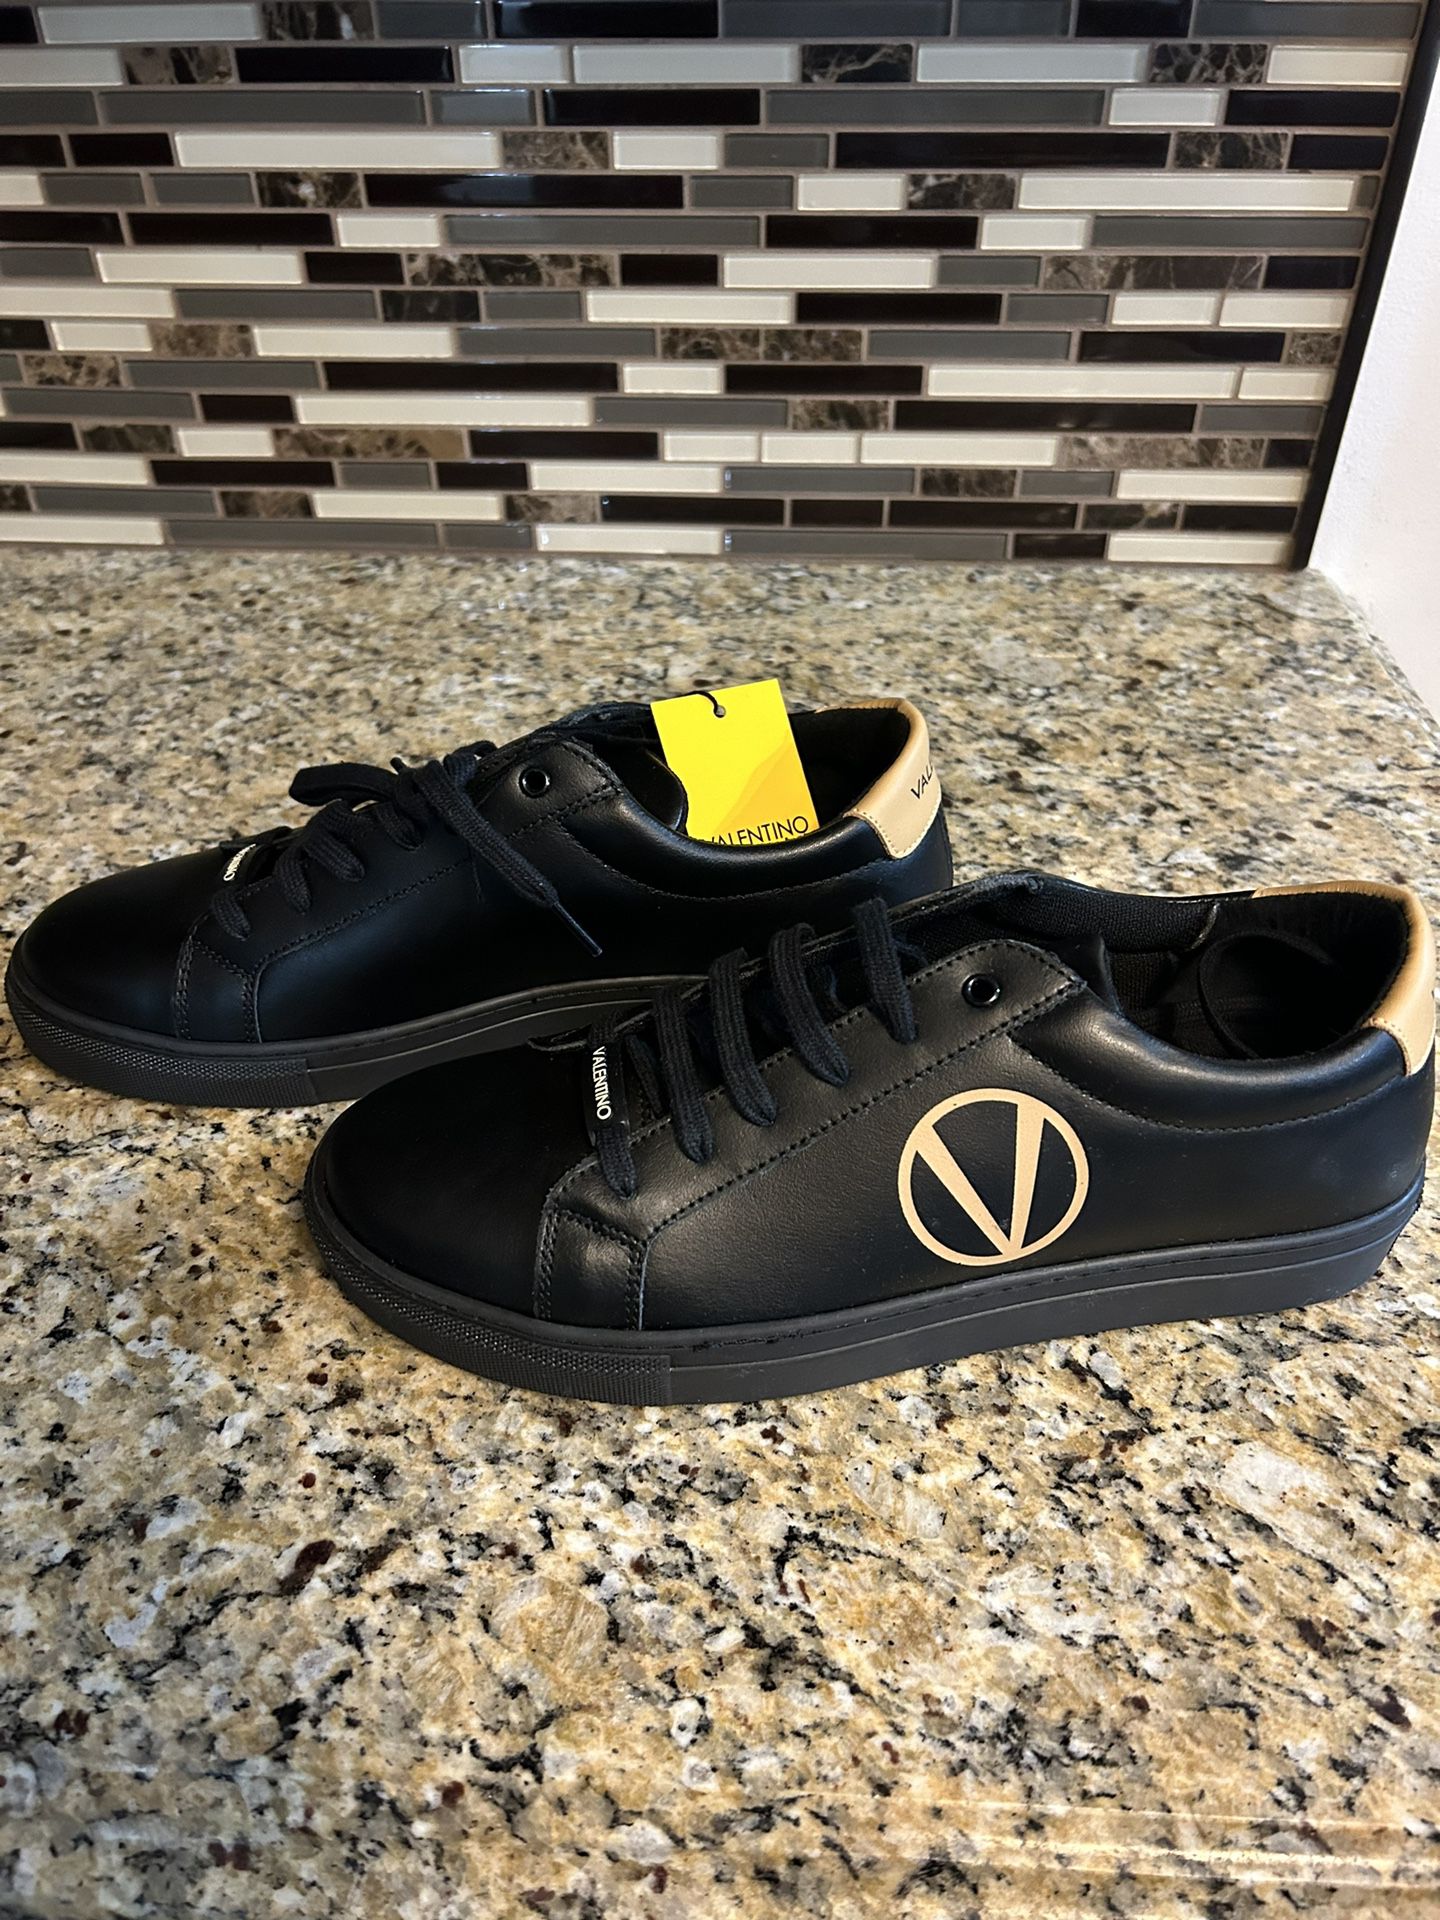 Valentino Sneakers Mens 9.5 Sale NY - OfferUp